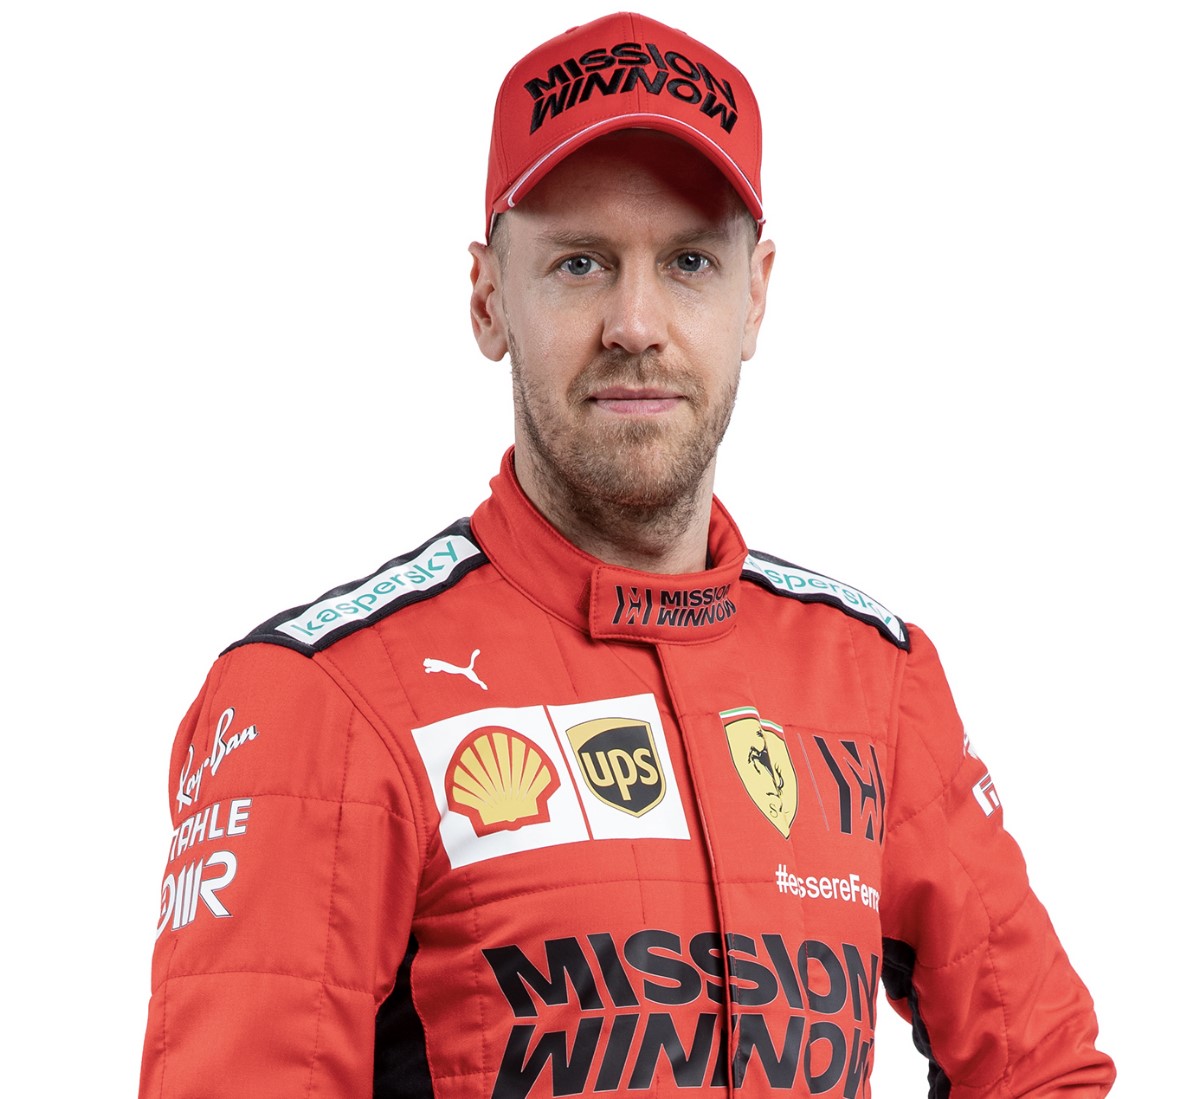 Ferrari have begun talks with Vettel for a new contract